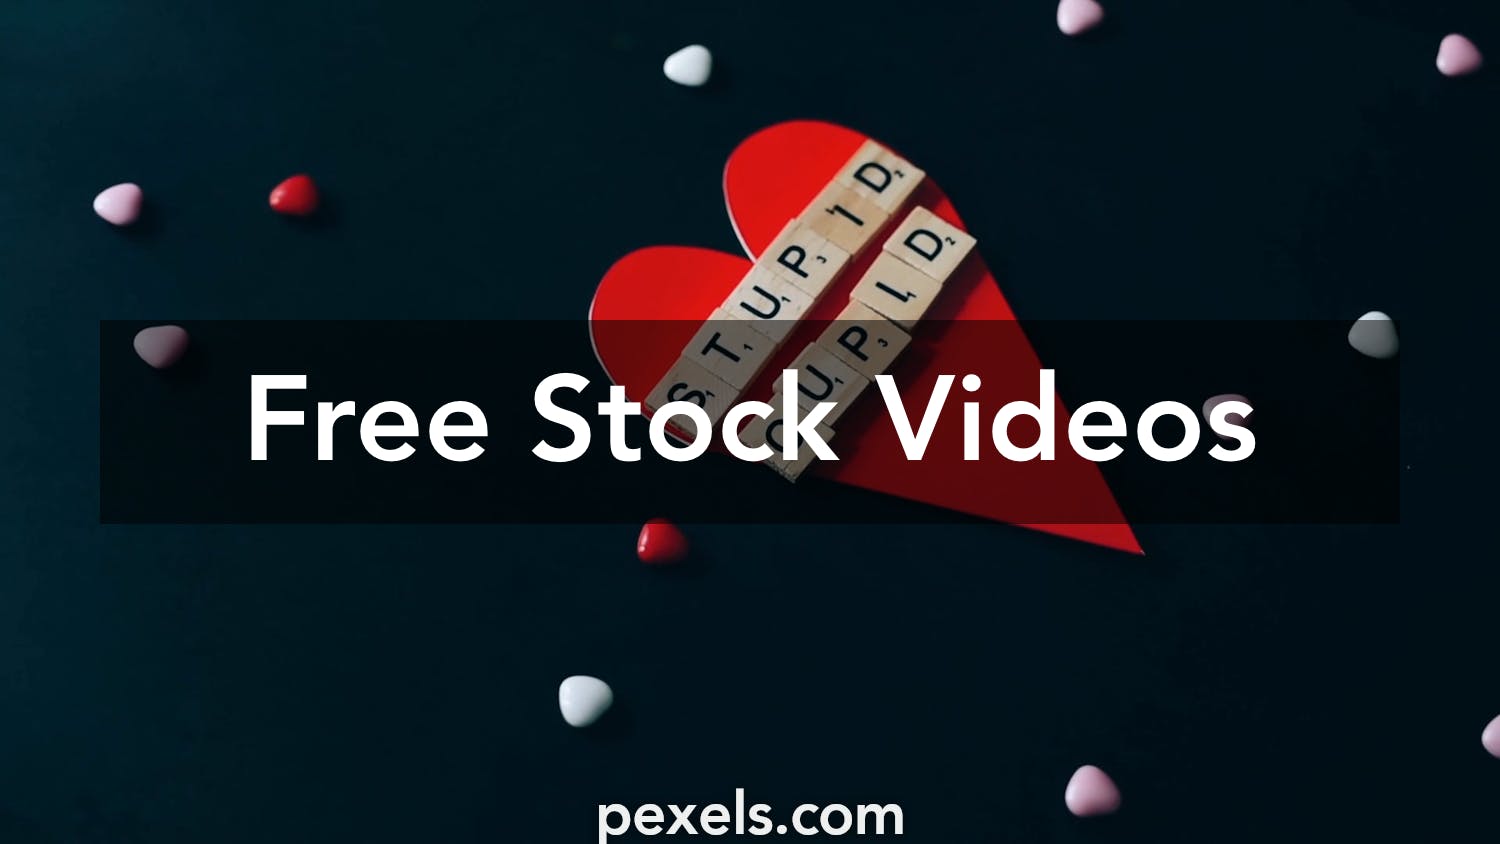 Idiot Stock Footage: Royalty-Free Video Clips - Storyblocks